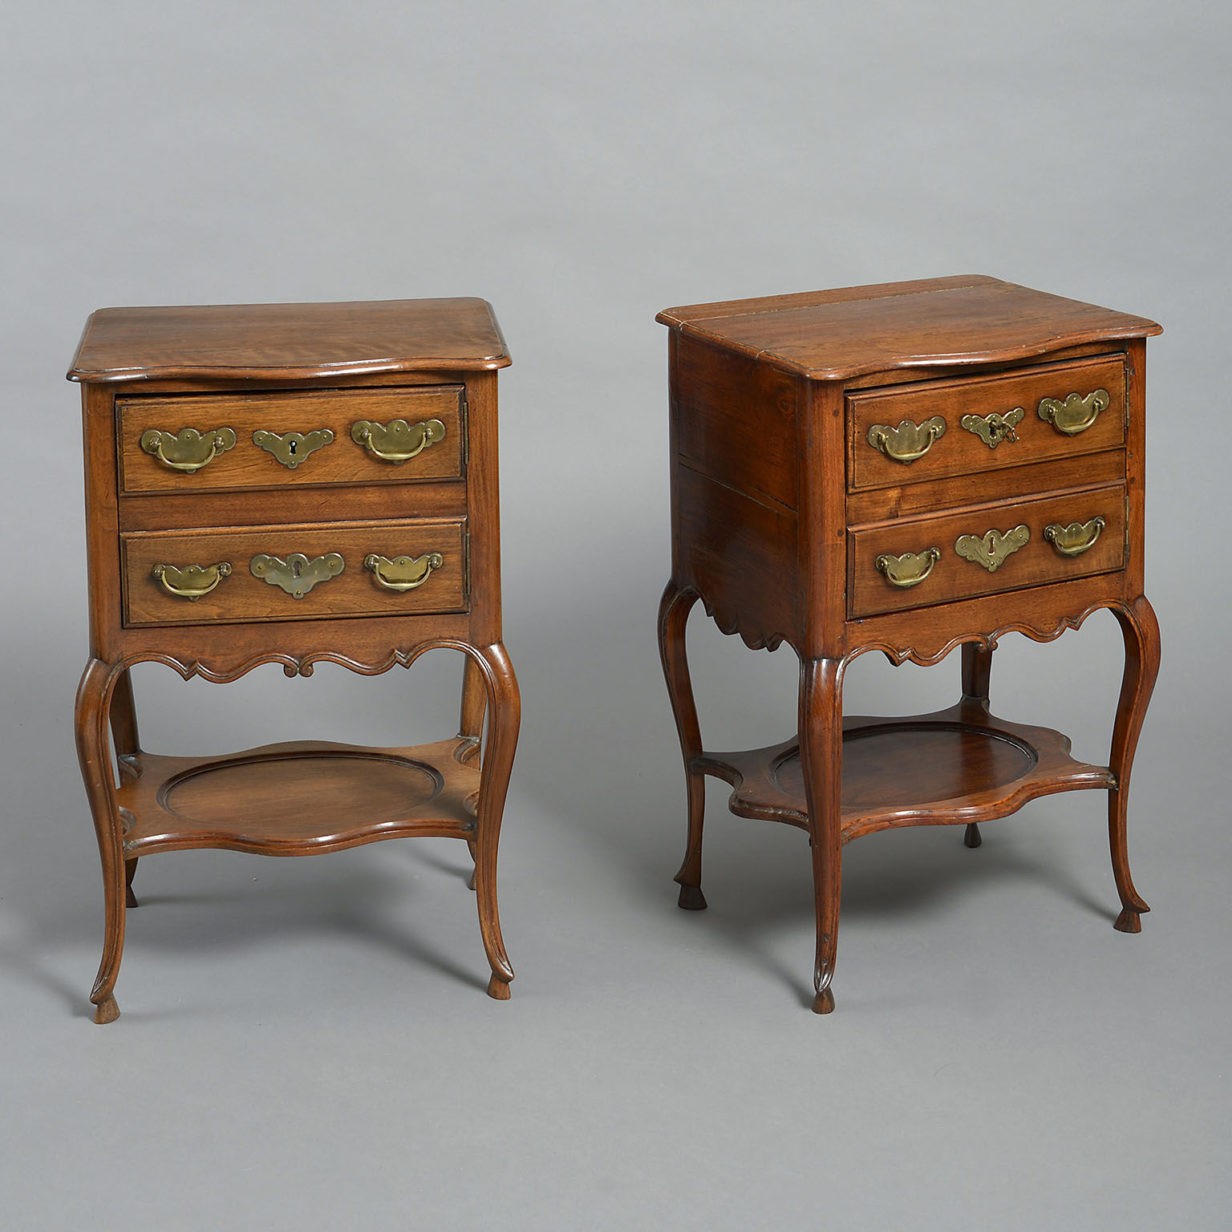 A pair of 18th century walnut and chestnut bedside tables